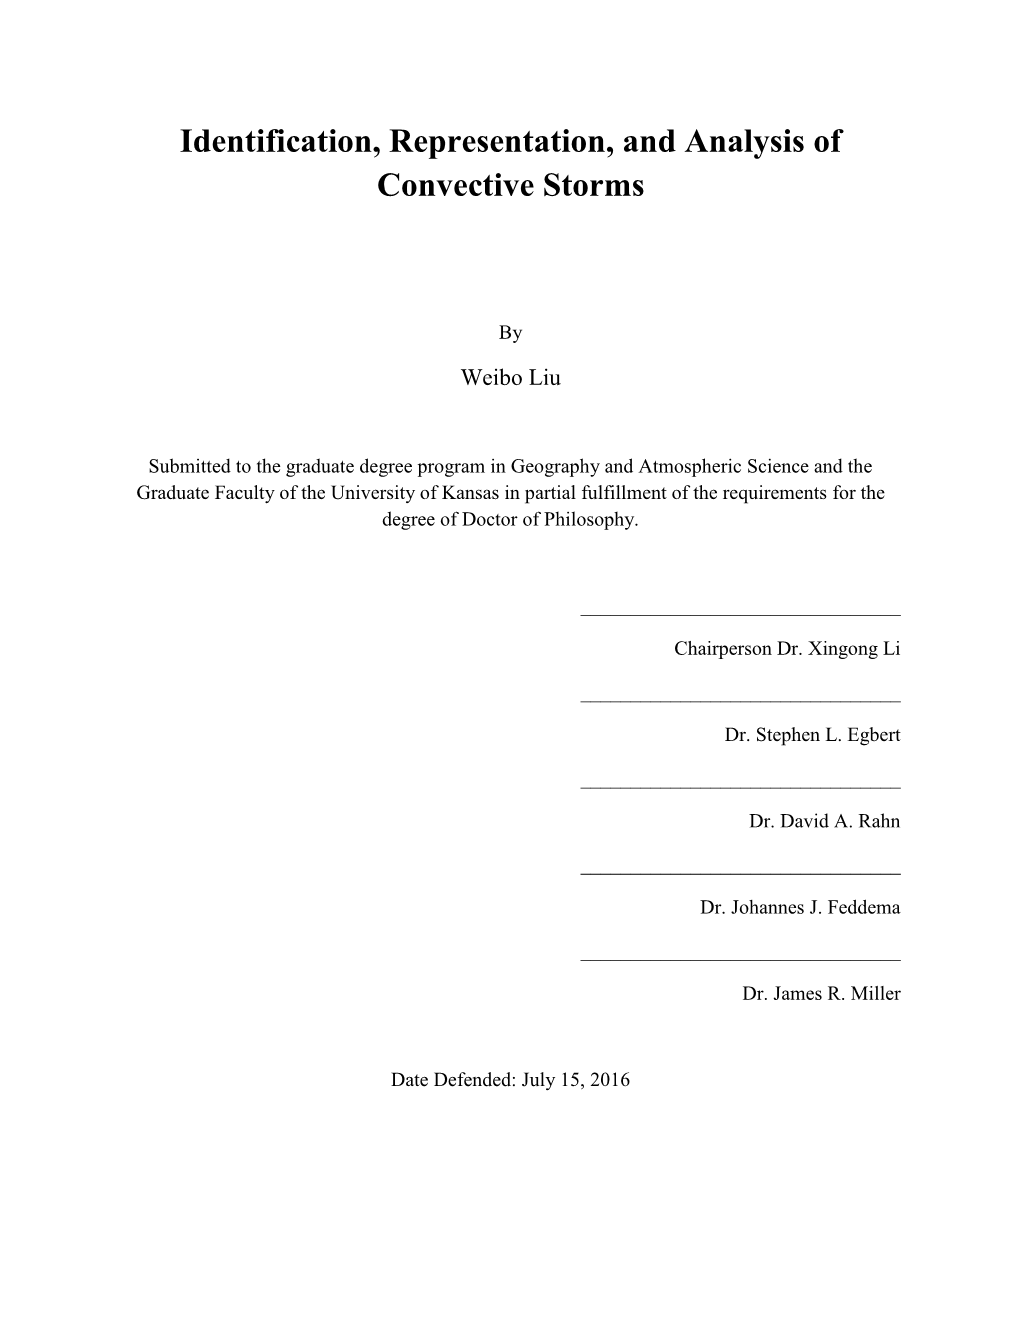 Identification, Representation, and Analysis of Convective Storms